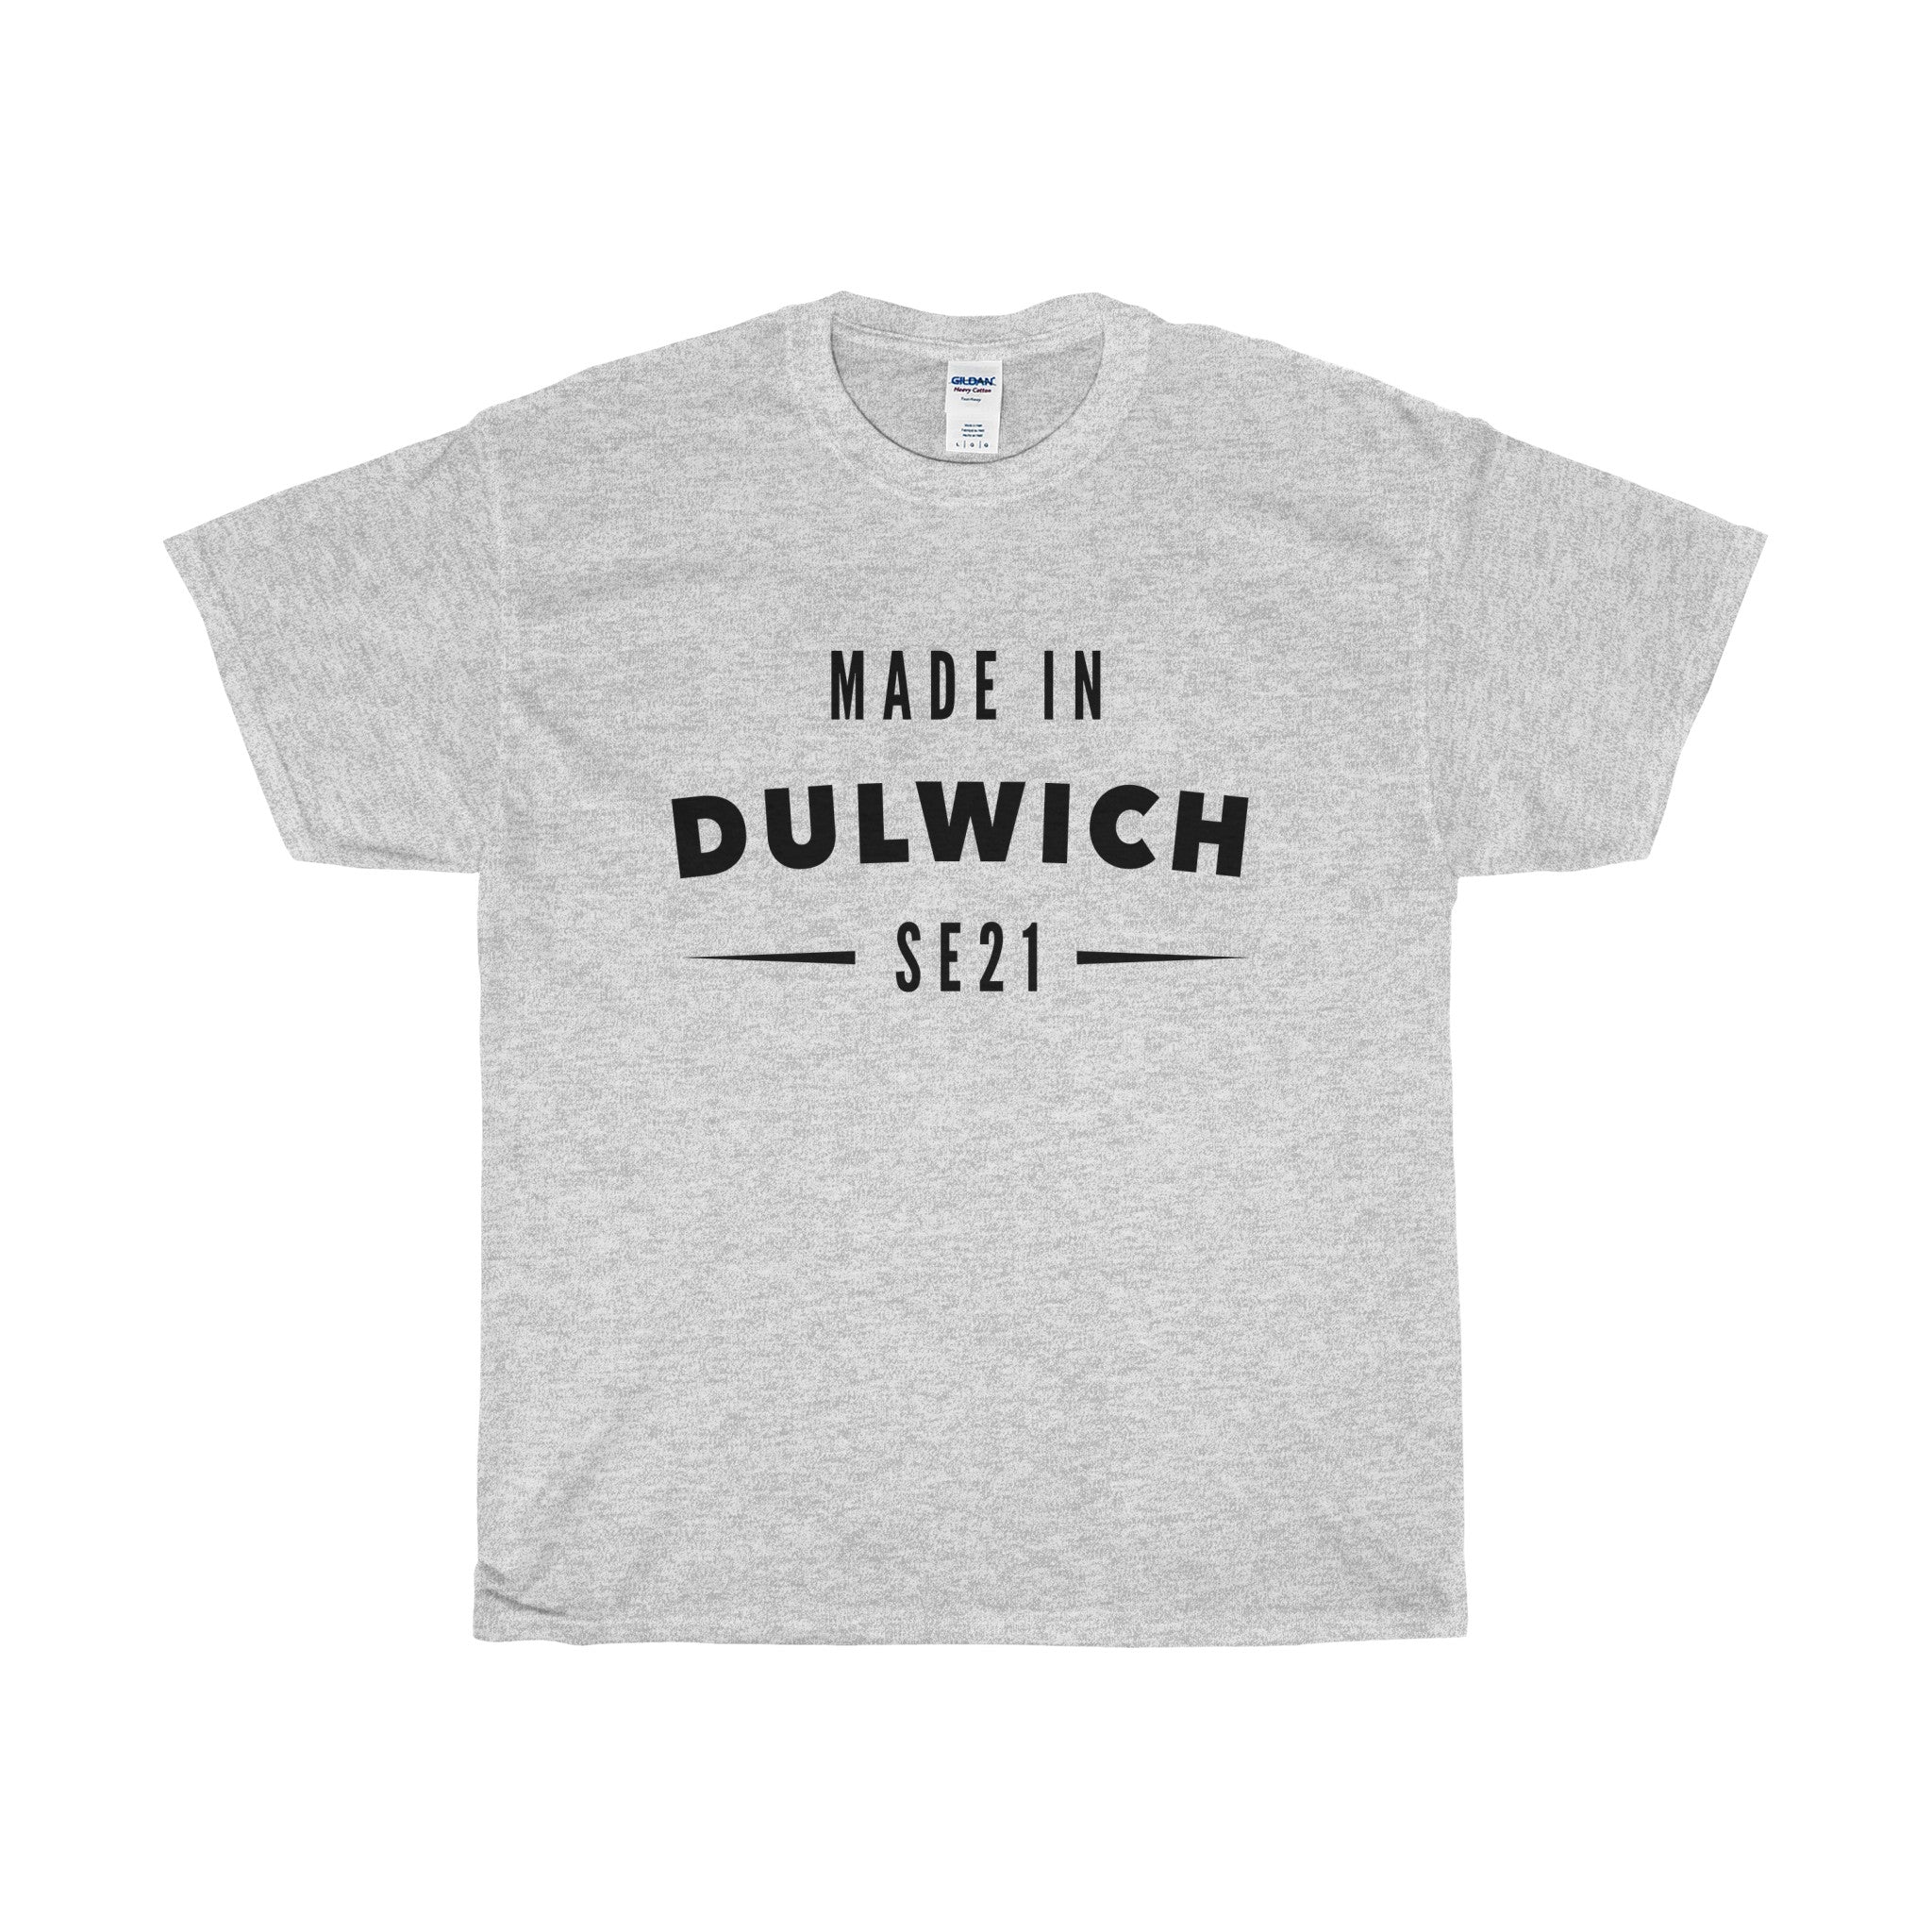 Made In Dulwich T-Shirt